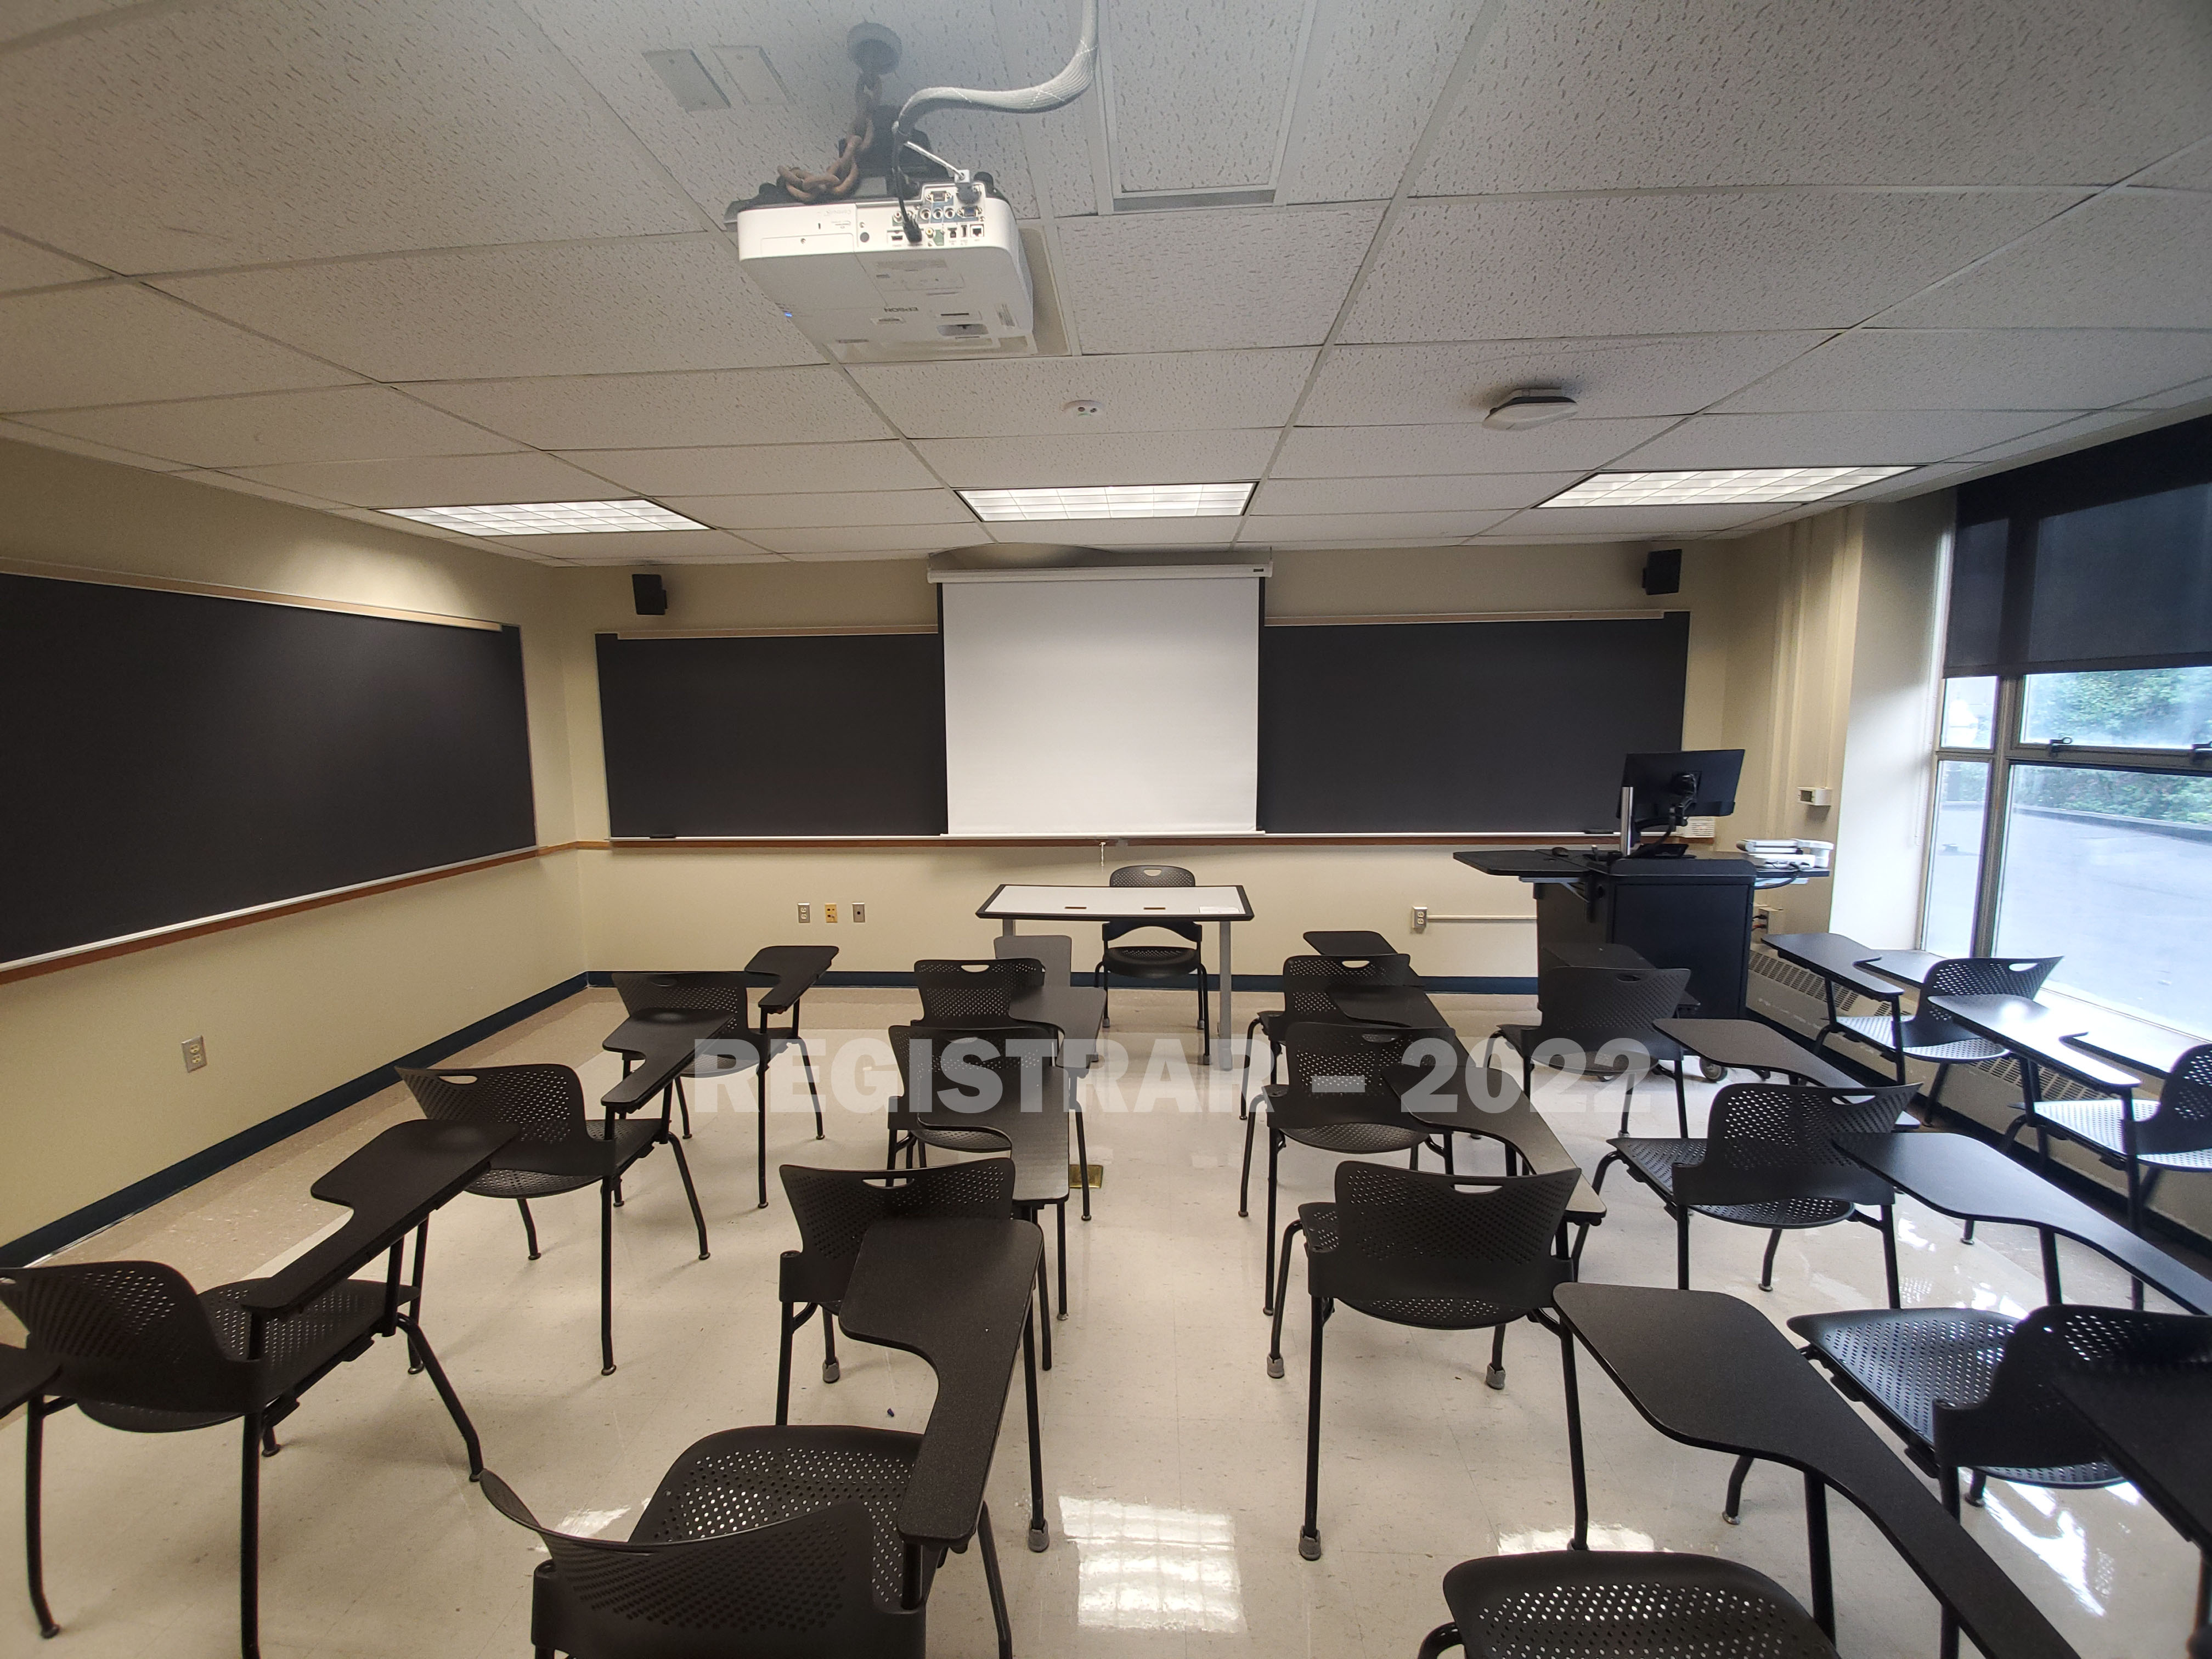 Enarson Classroom Building room 214 ultra wide angle view from the back of the room with projector screen down